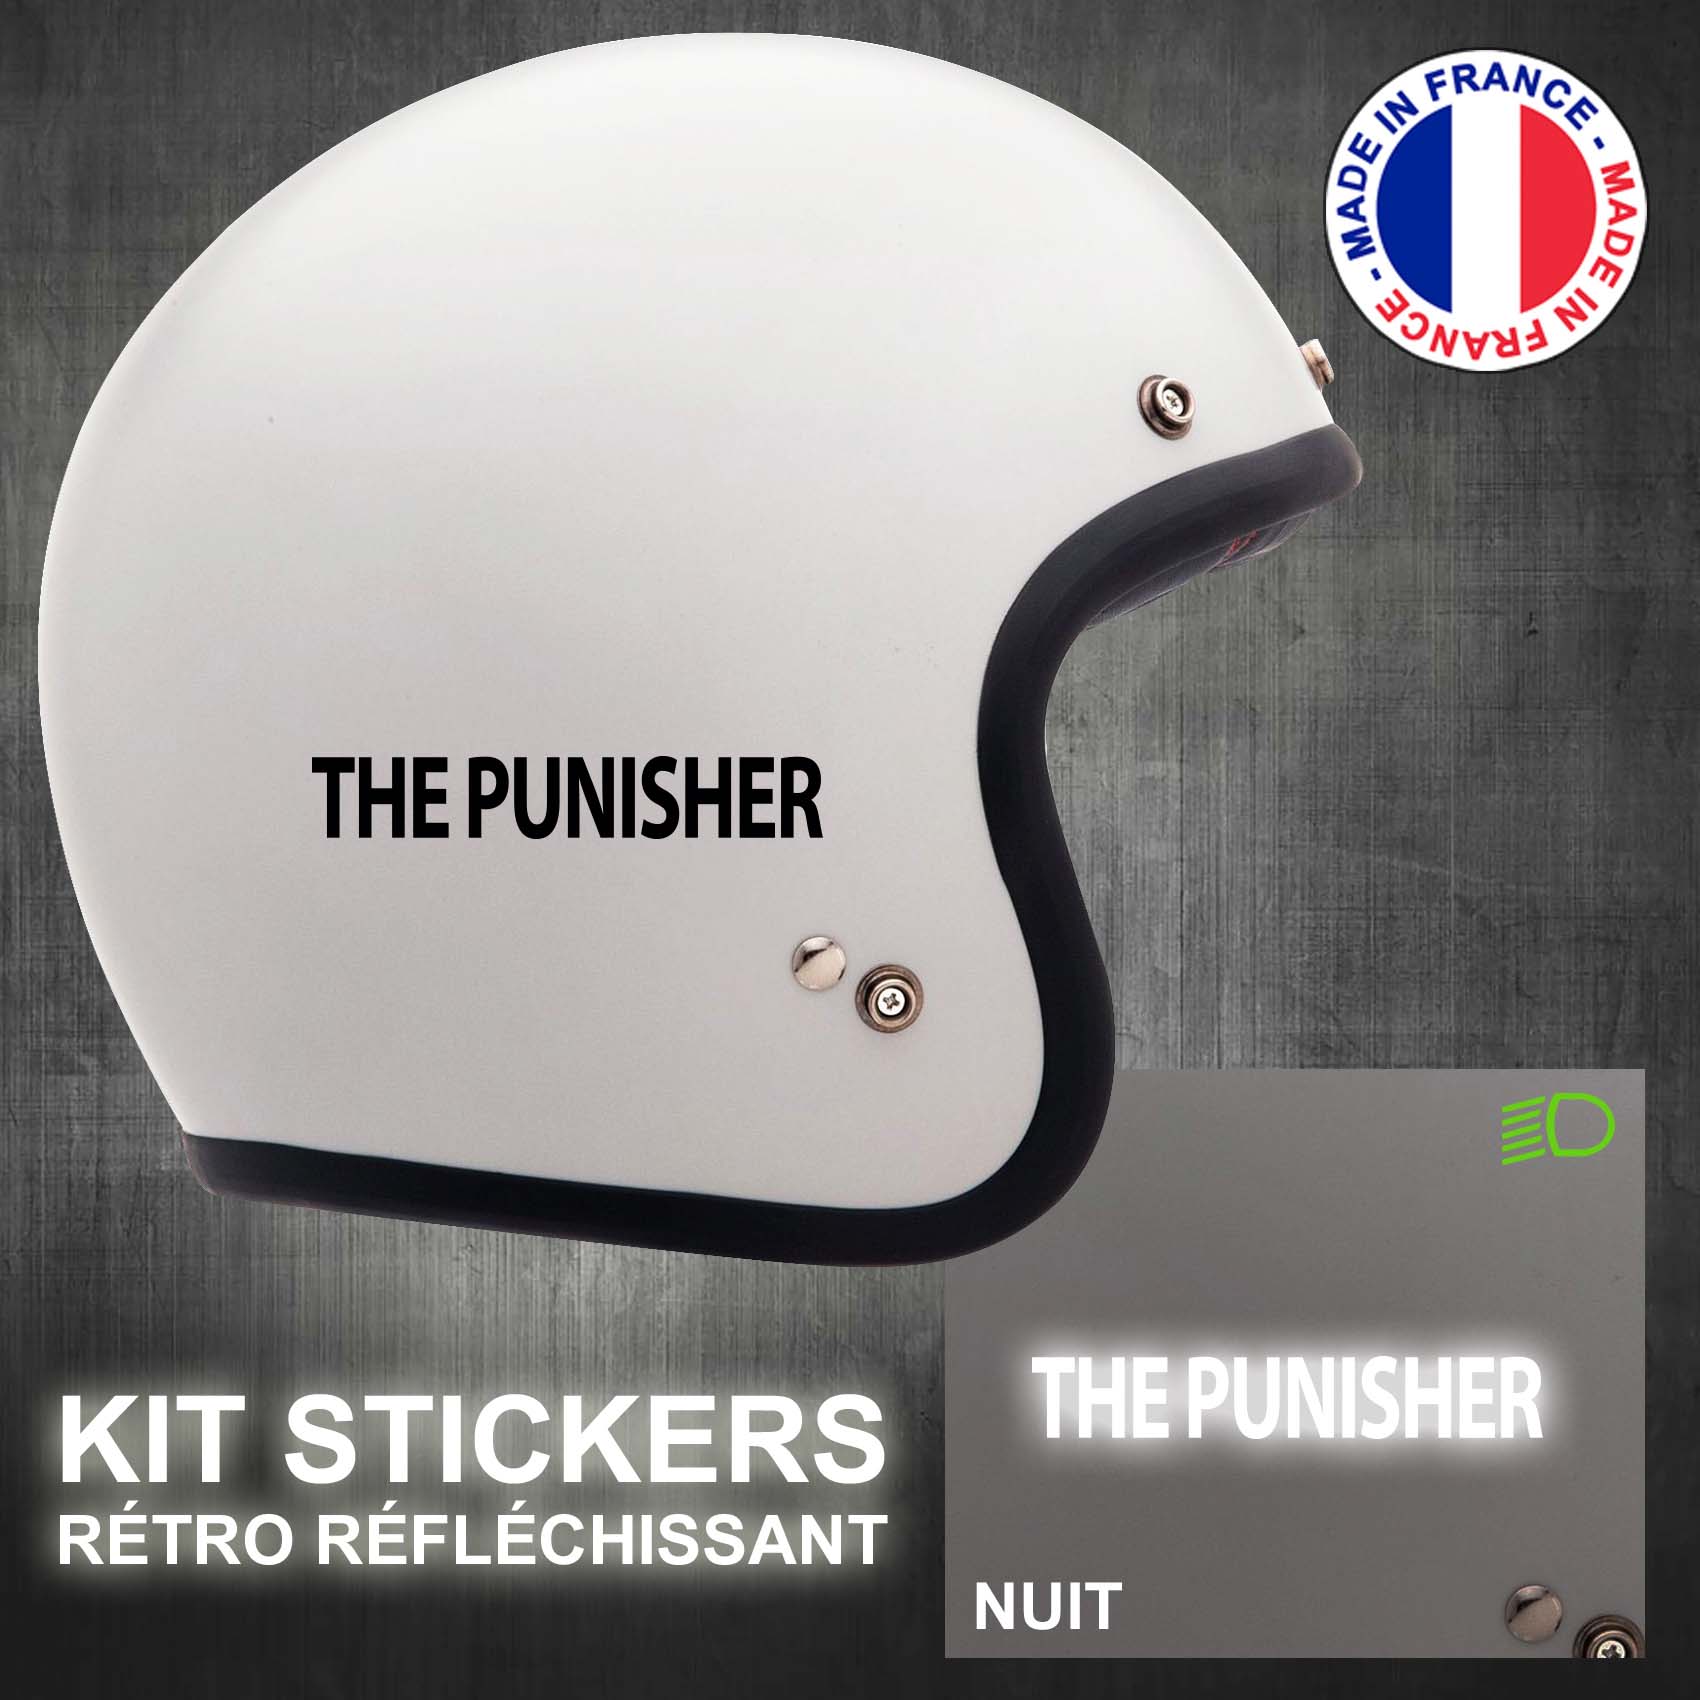 stickers-casque-moto-the-punisher-harley-ref3-retro-reflechissant-autocollant-moto-velo-tuning-racing-route-sticker-casques-adhesif-scooter-nuit-securite-decals-personnalise-personnalisable-